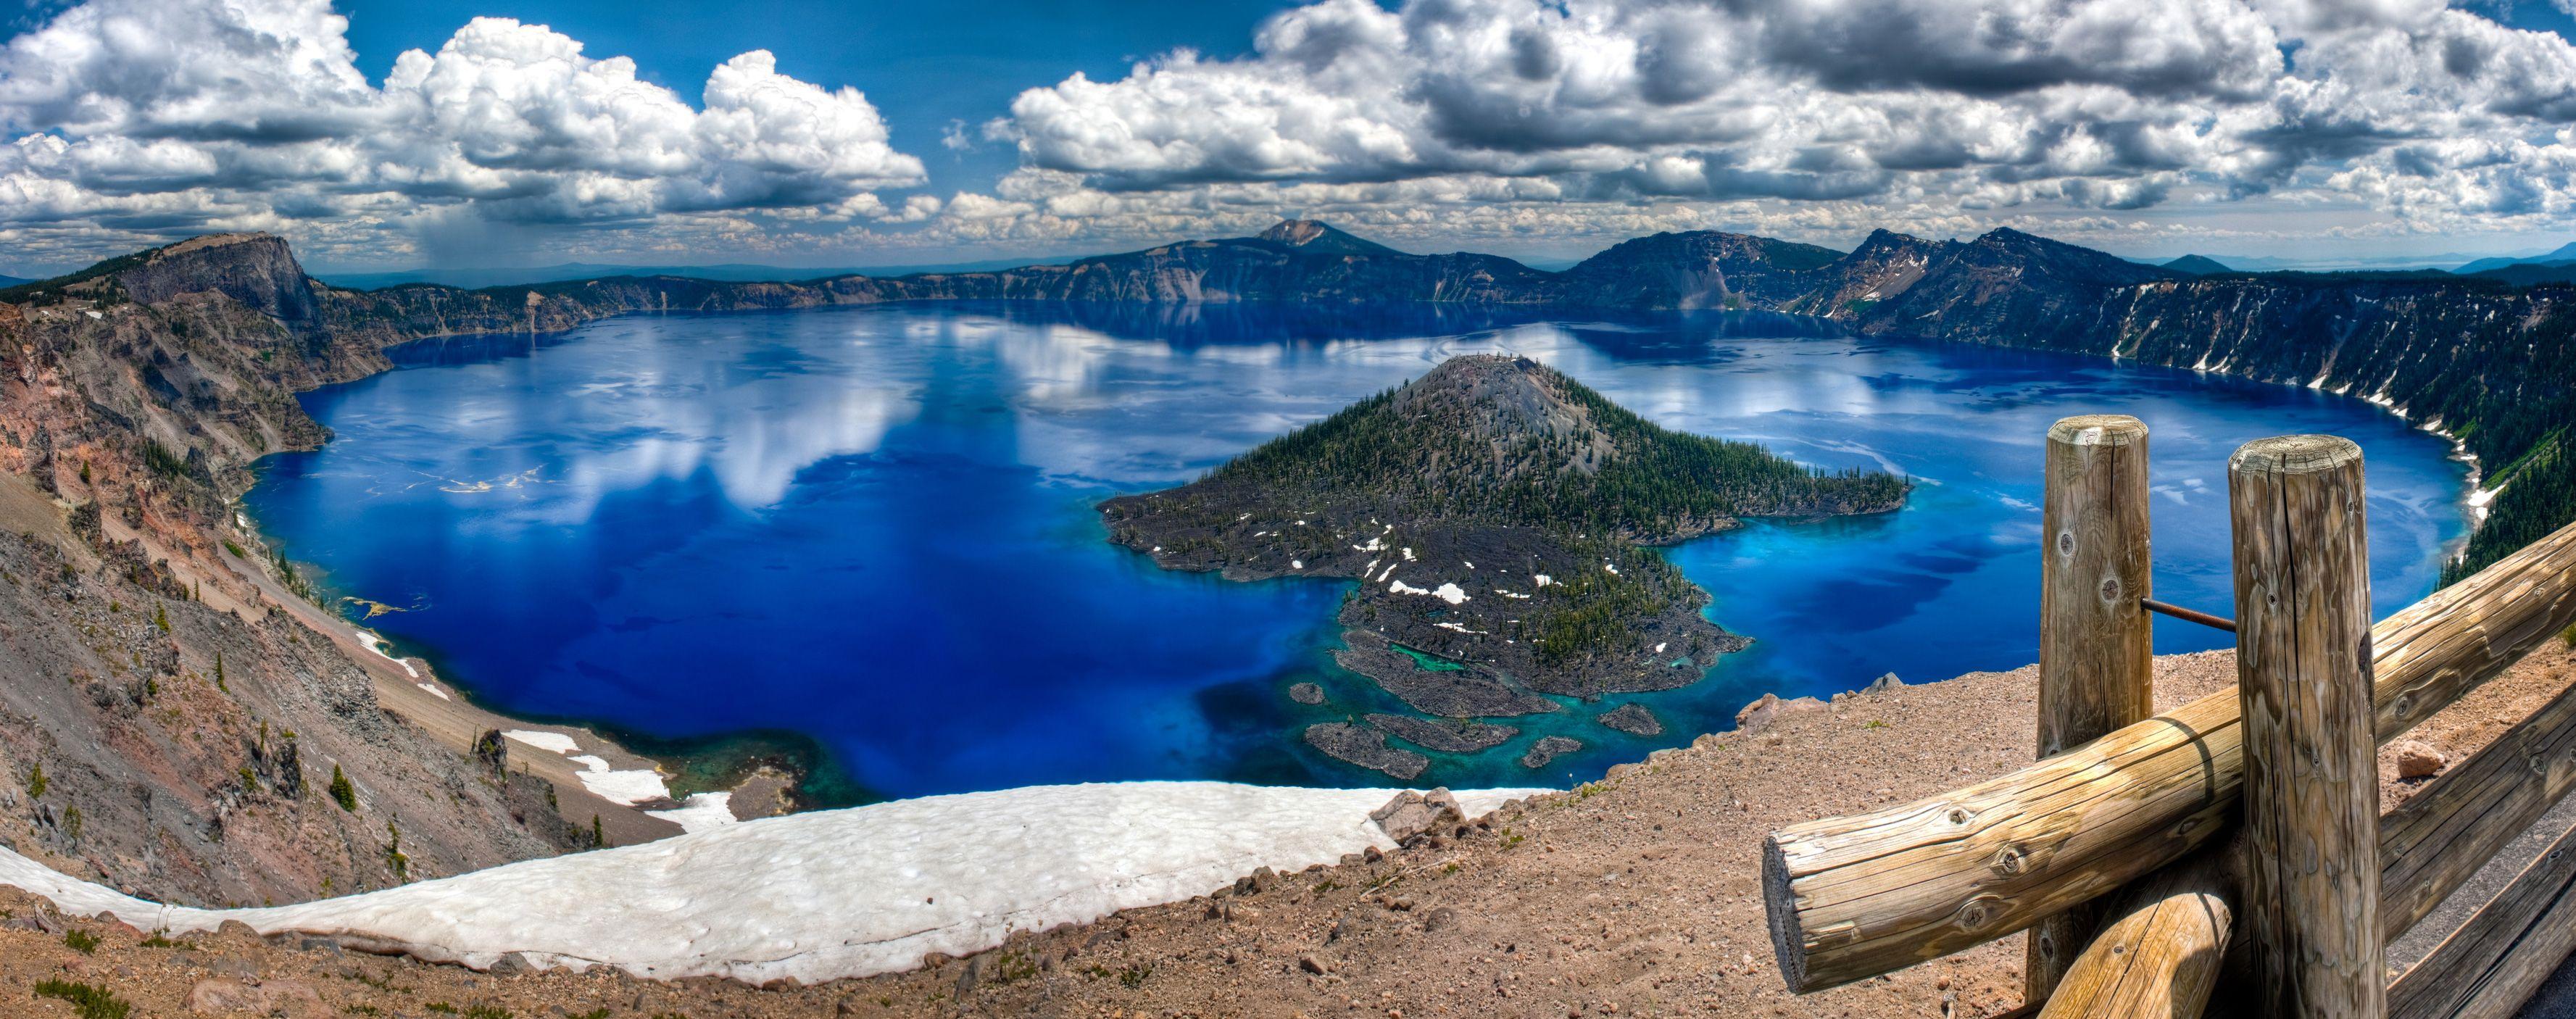 Becca Curram: Crater Lake National Park High Quality Wallpaper